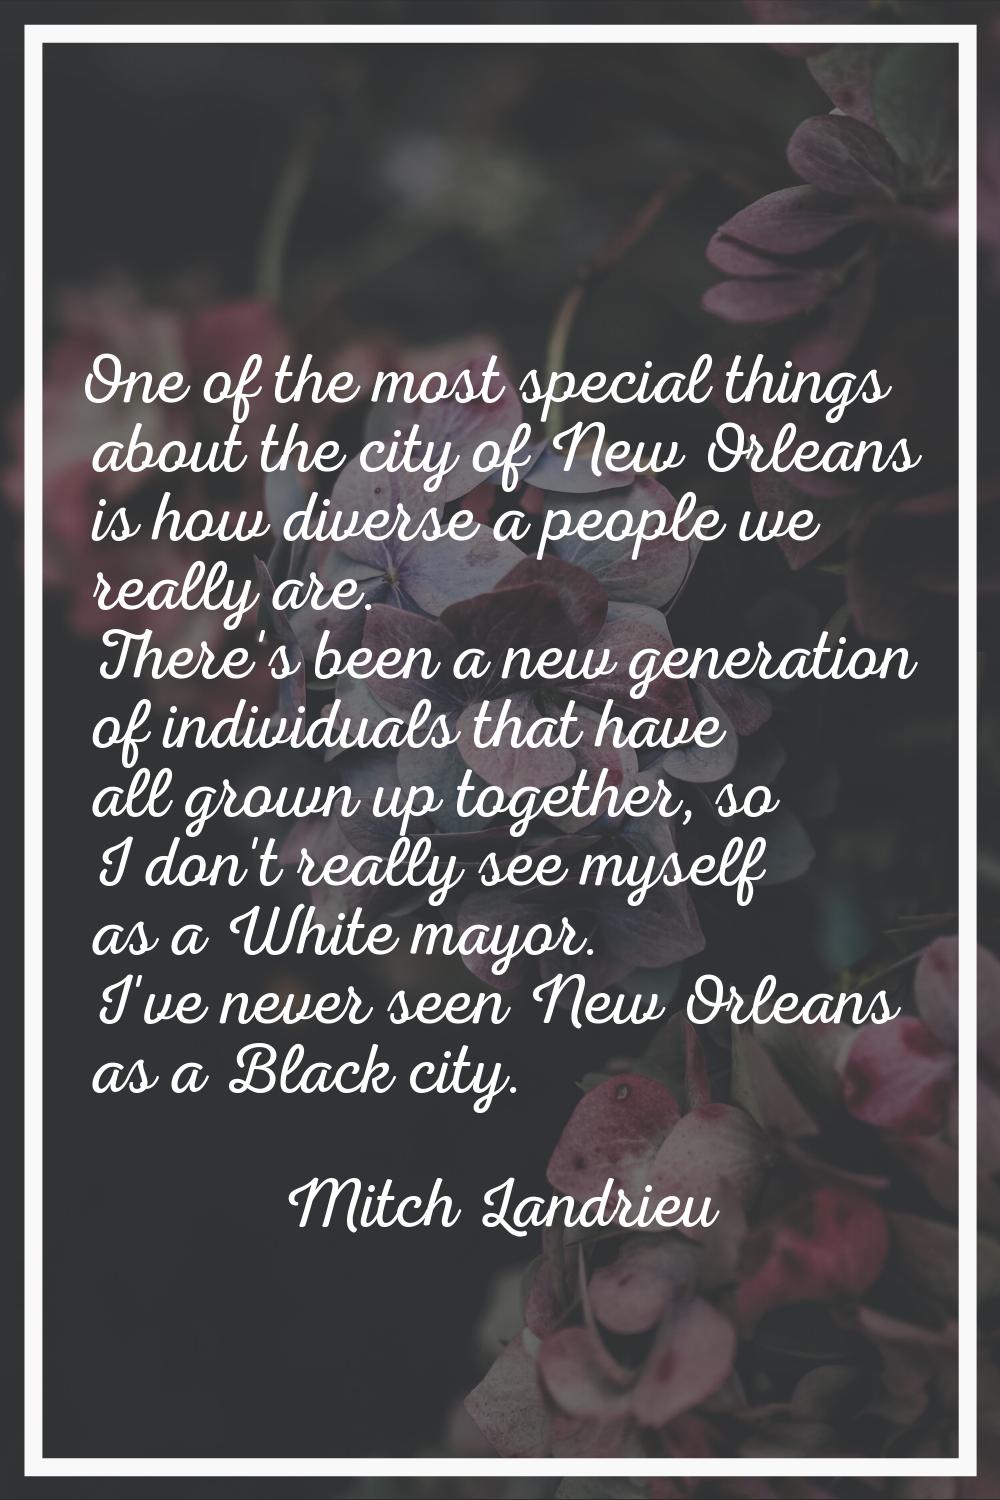 One of the most special things about the city of New Orleans is how diverse a people we really are.